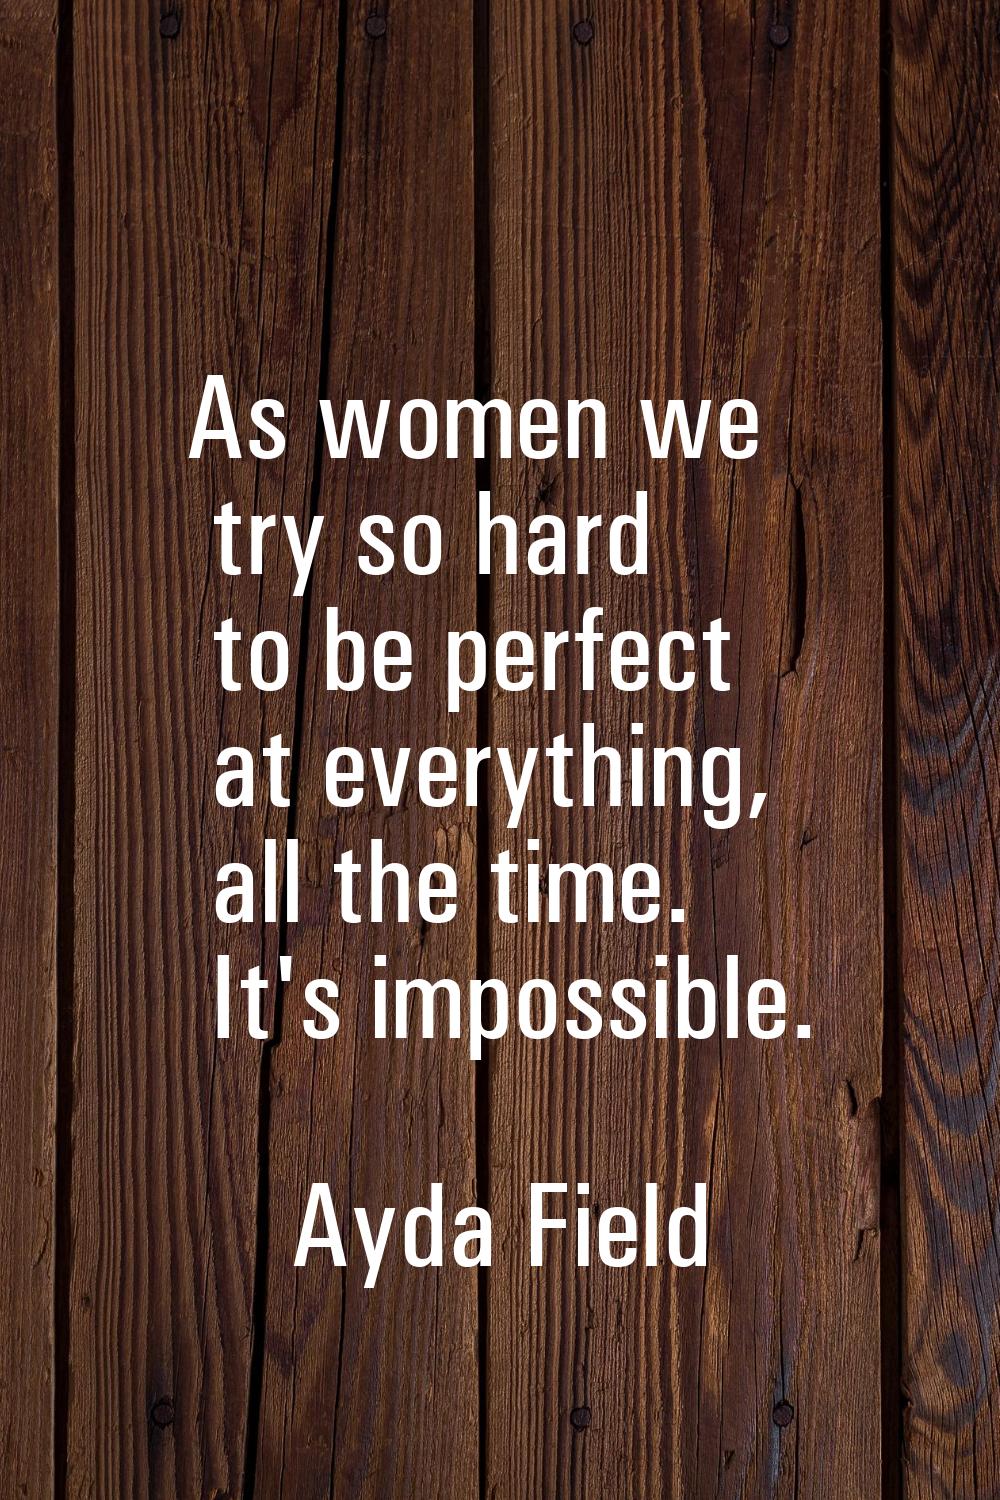 As women we try so hard to be perfect at everything, all the time. It's impossible.